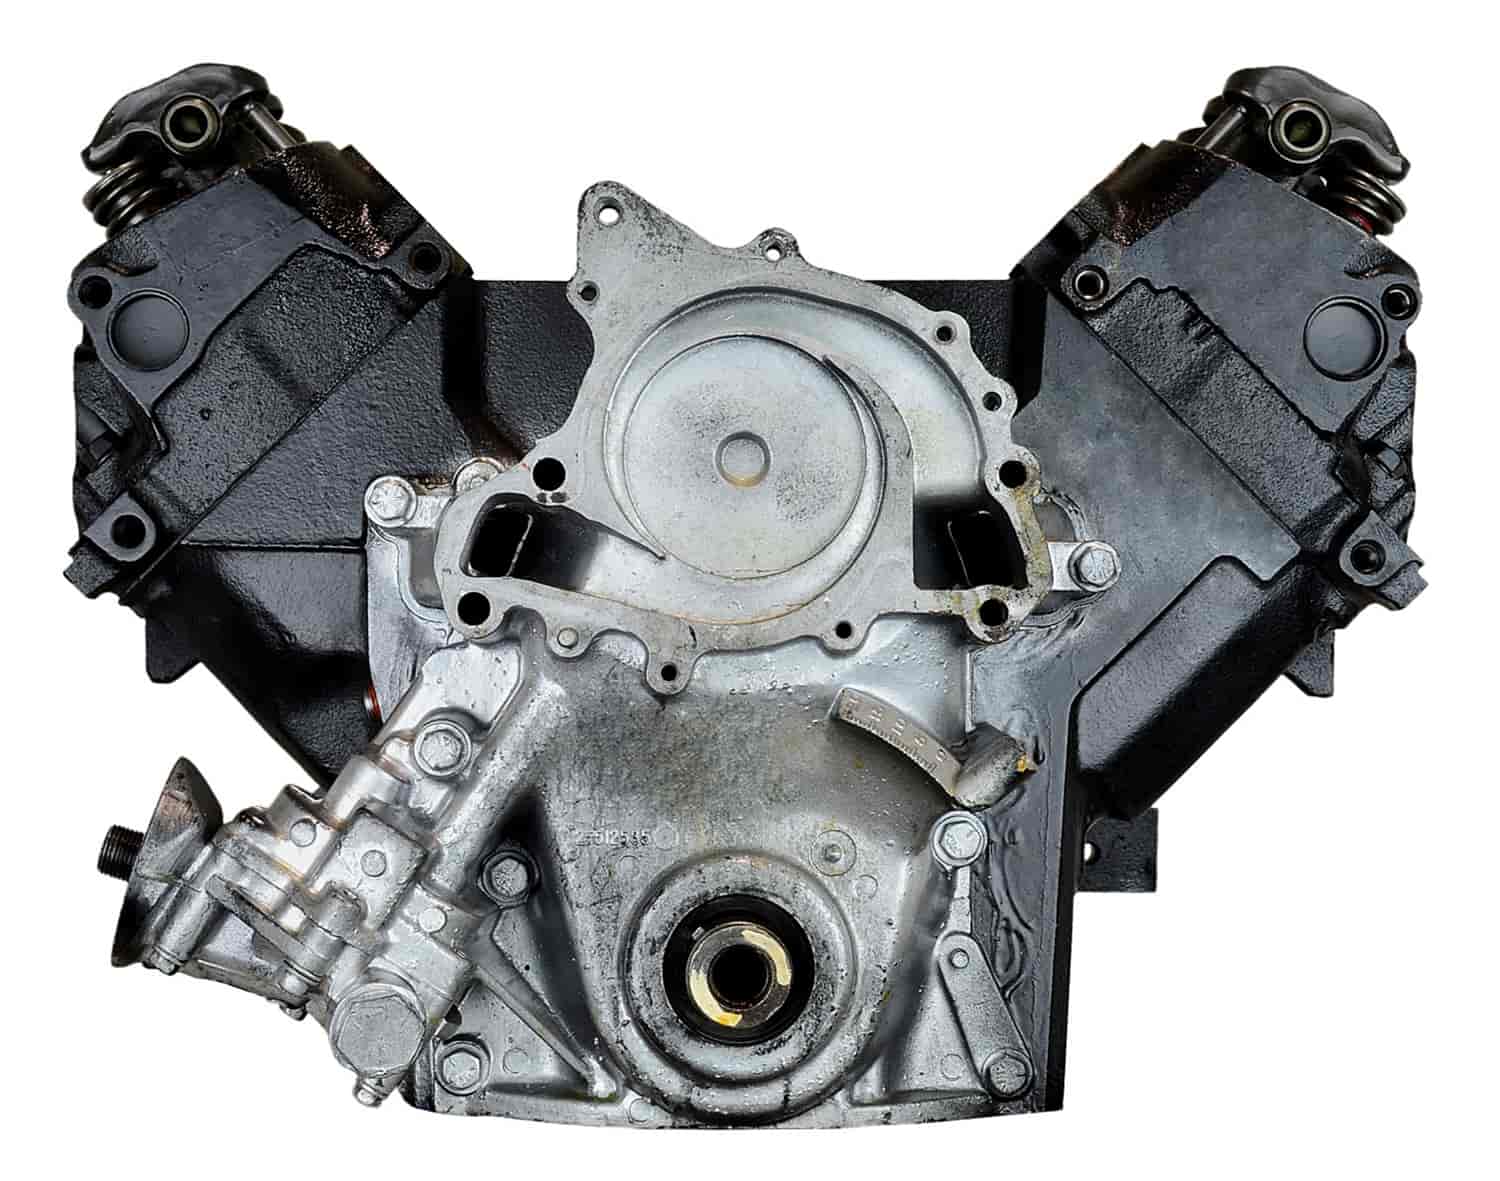 Remanufactured Crate Engine for 1982-1984 Buick/Oldsmobile with 3.0L V6